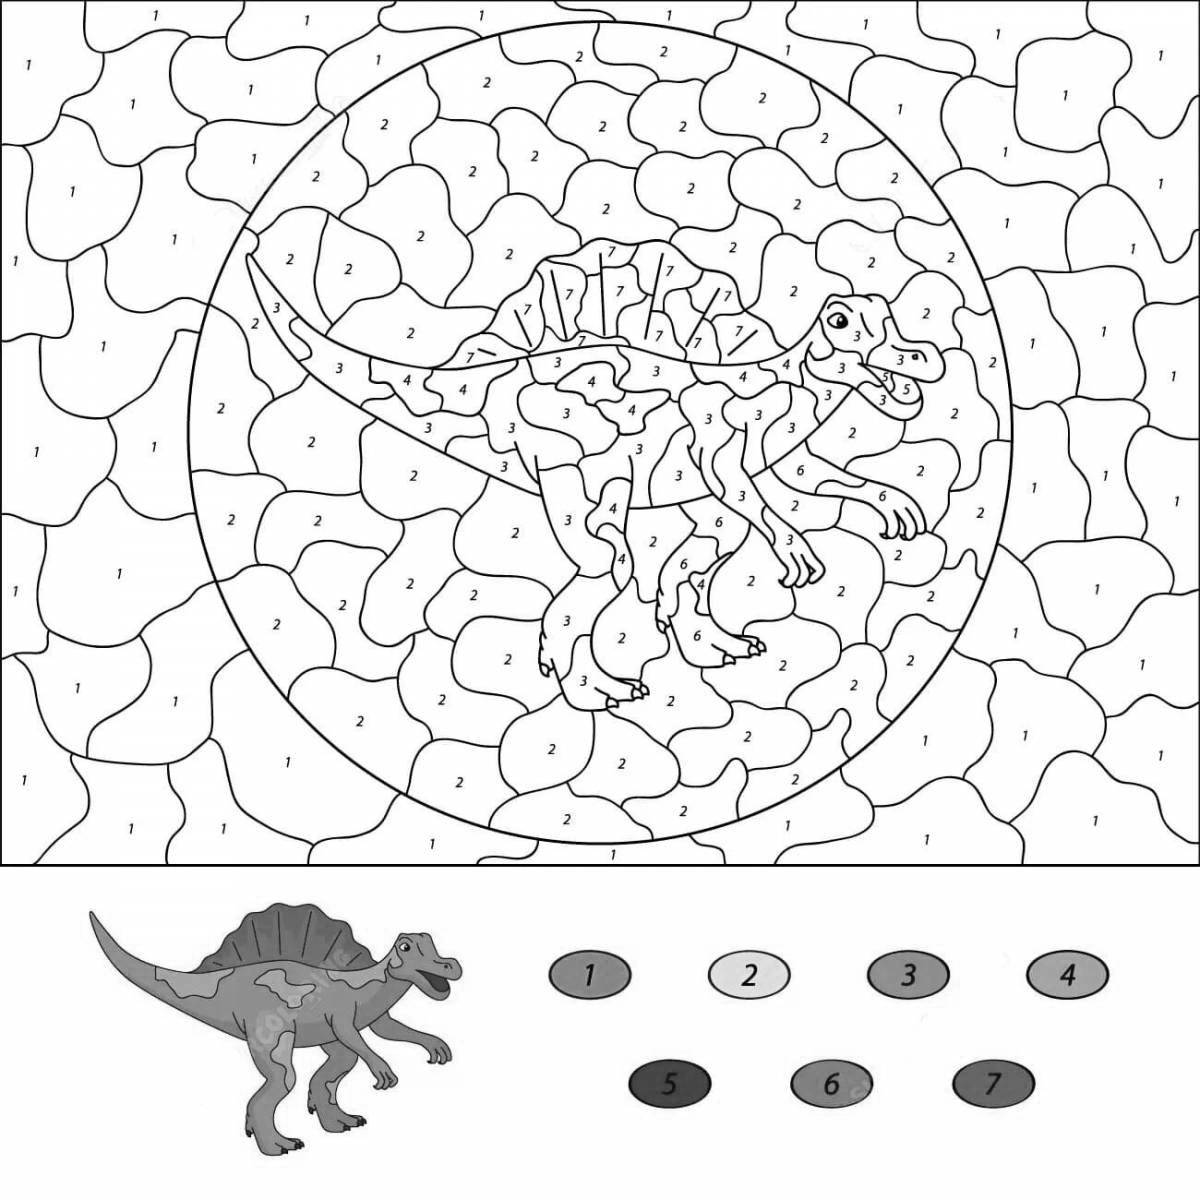 Detailed snake by numbers coloring page